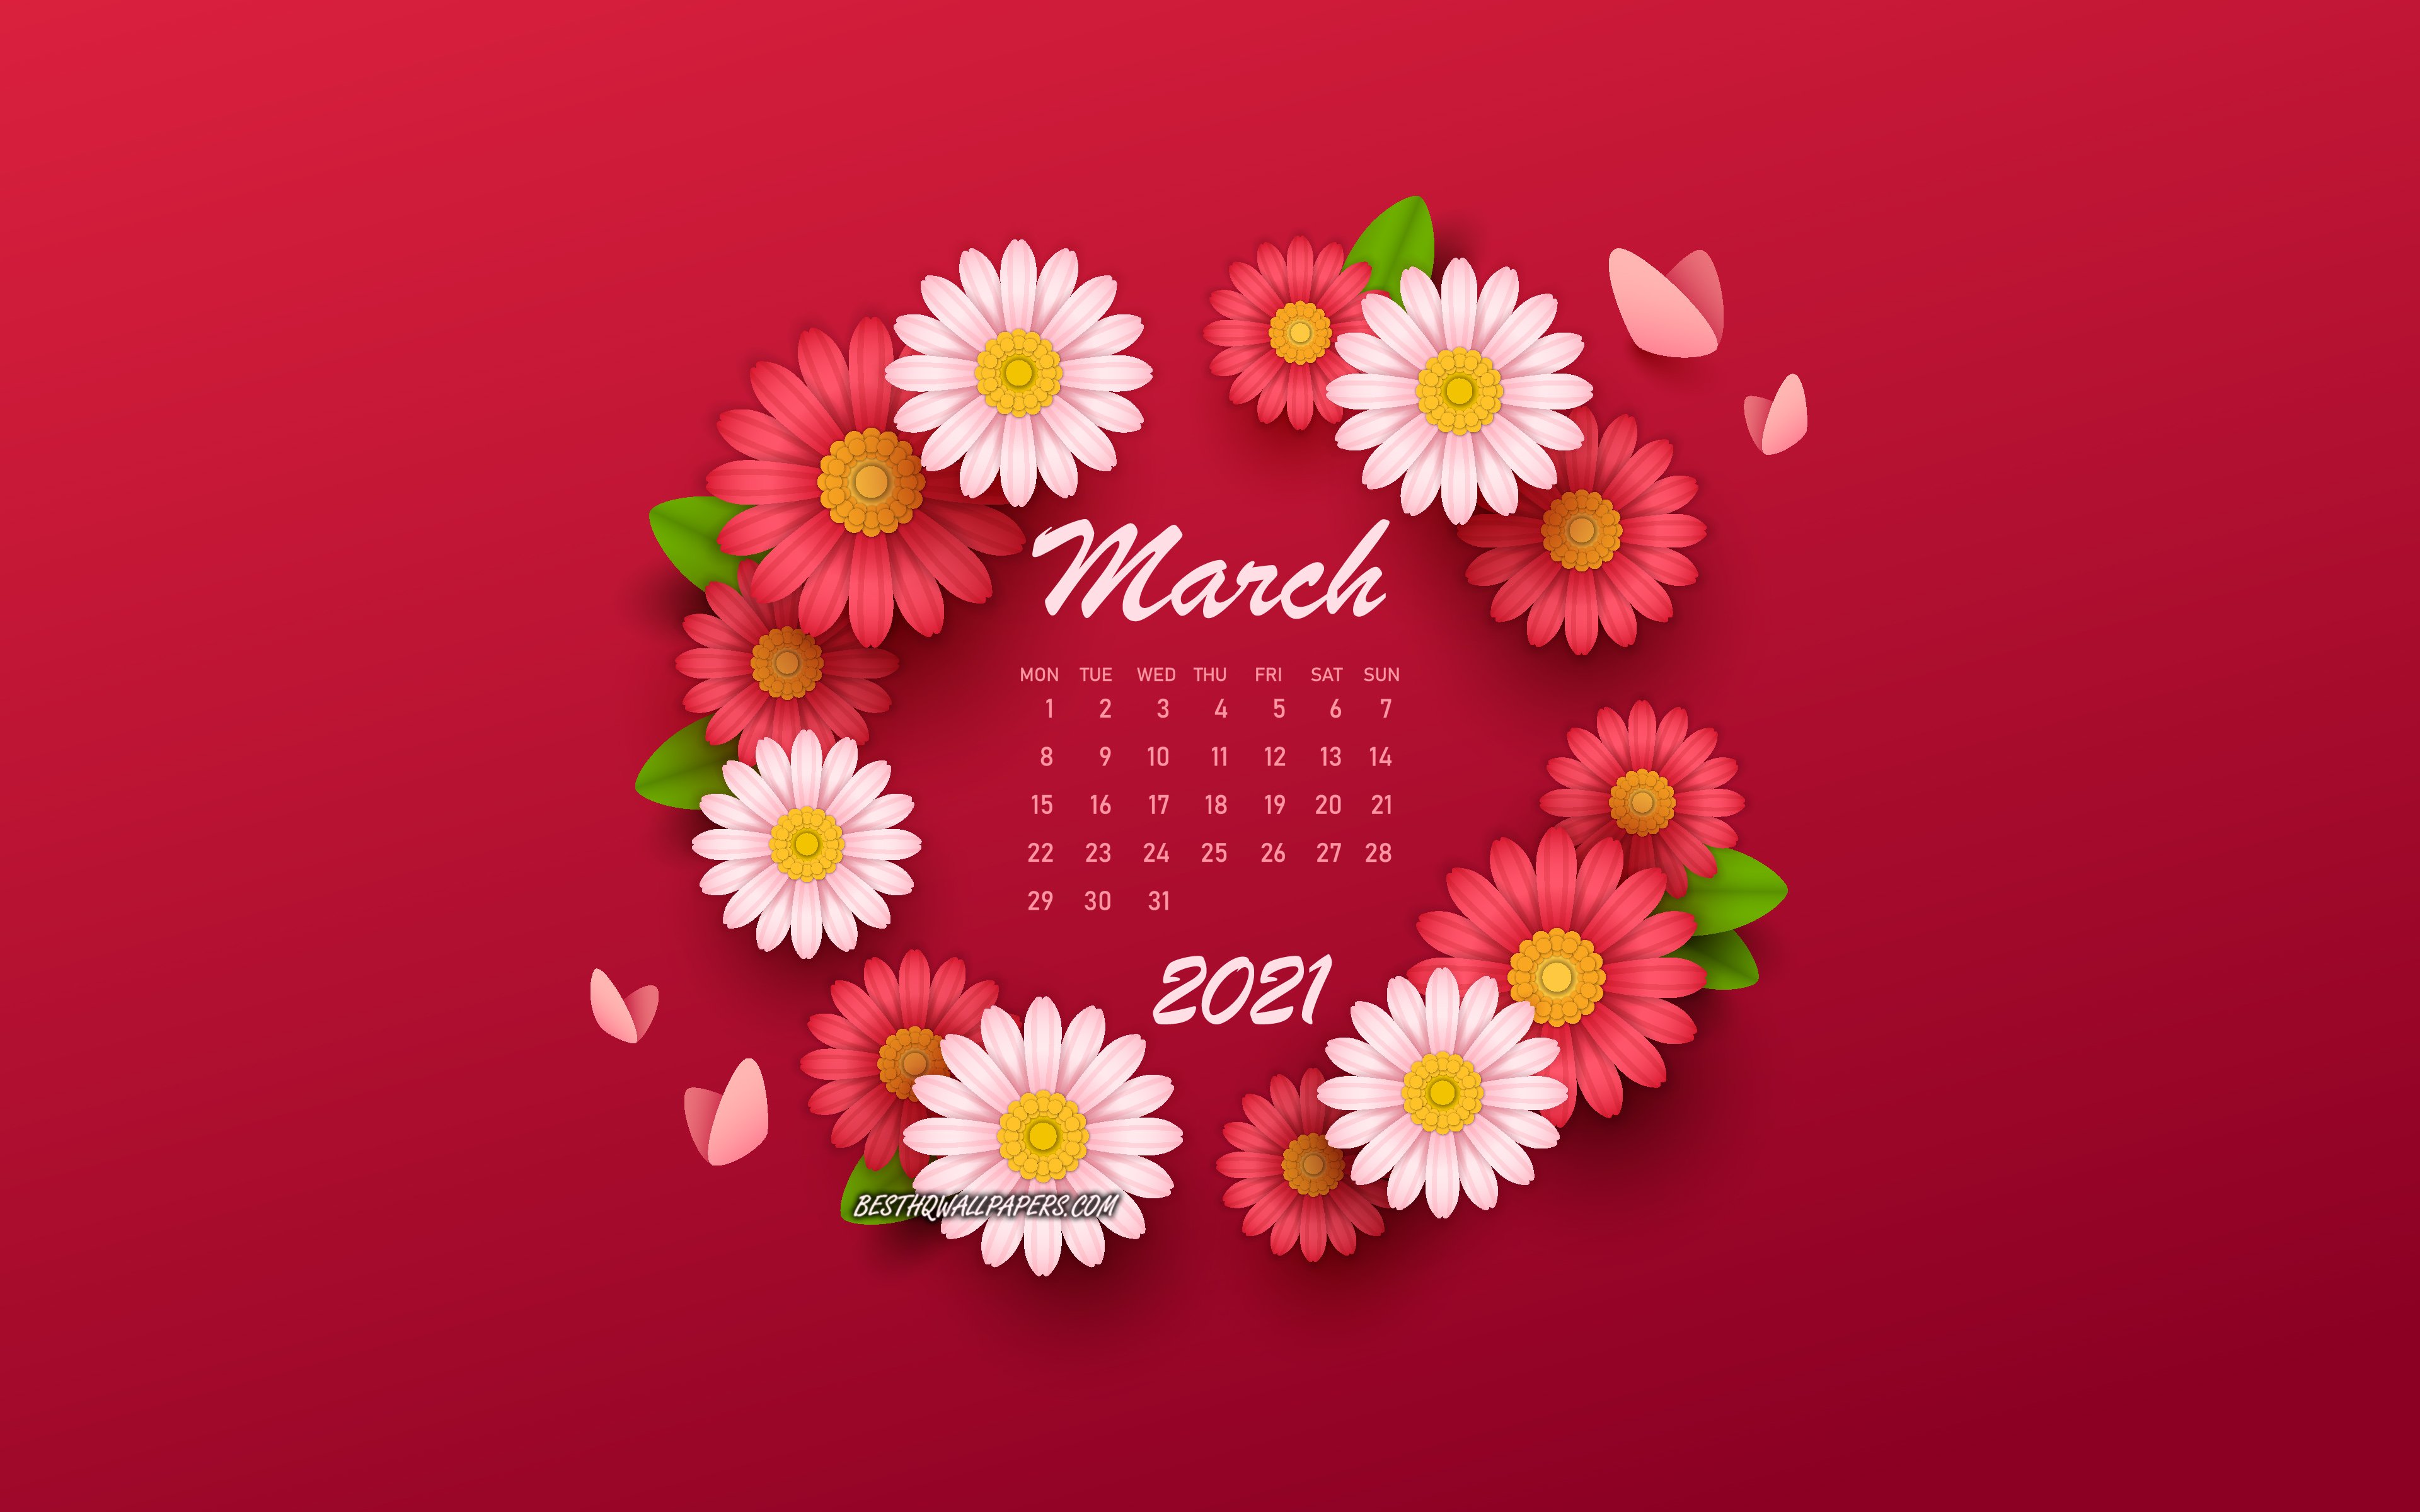 Download wallpapers 2021 March Calendar, background with flowers